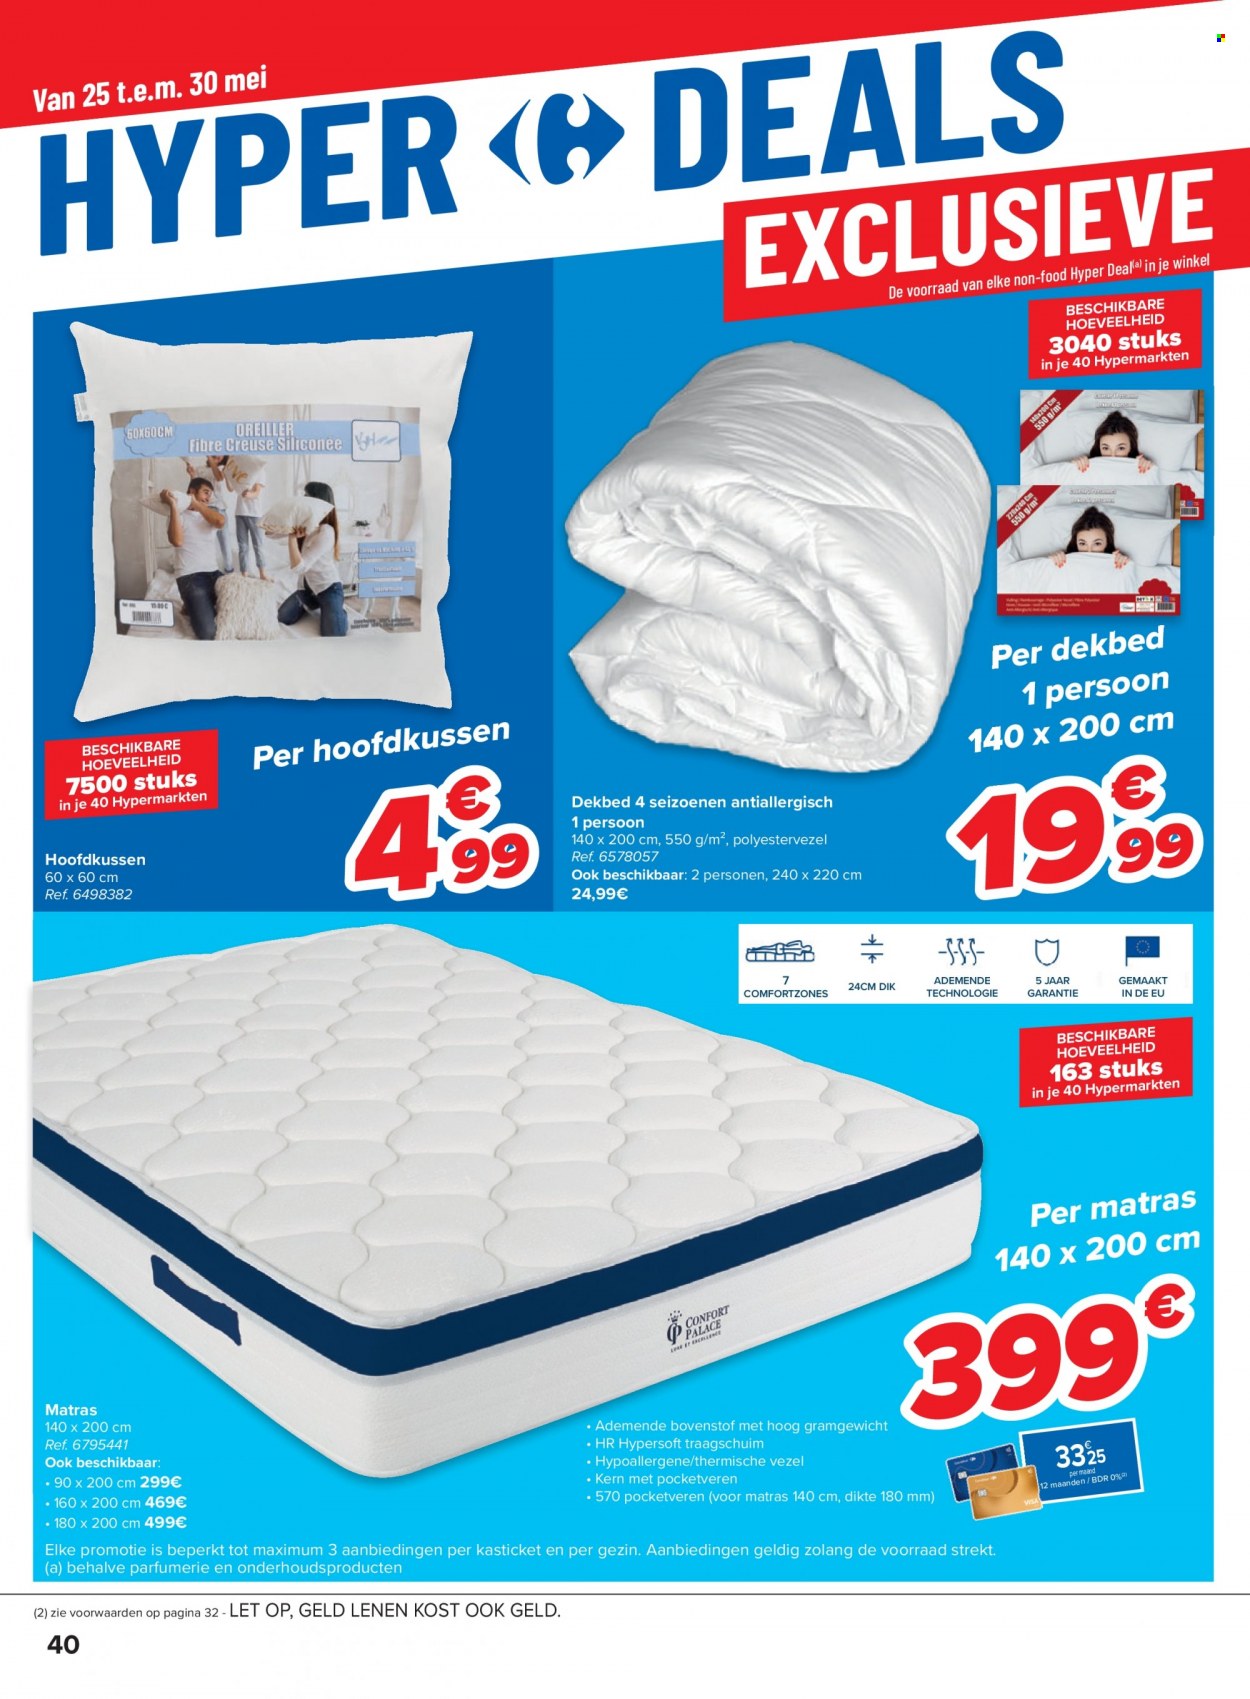 Catalogue Carrefour hypermarkt - 24.5.2022 - 30.5.2022. Page 40.